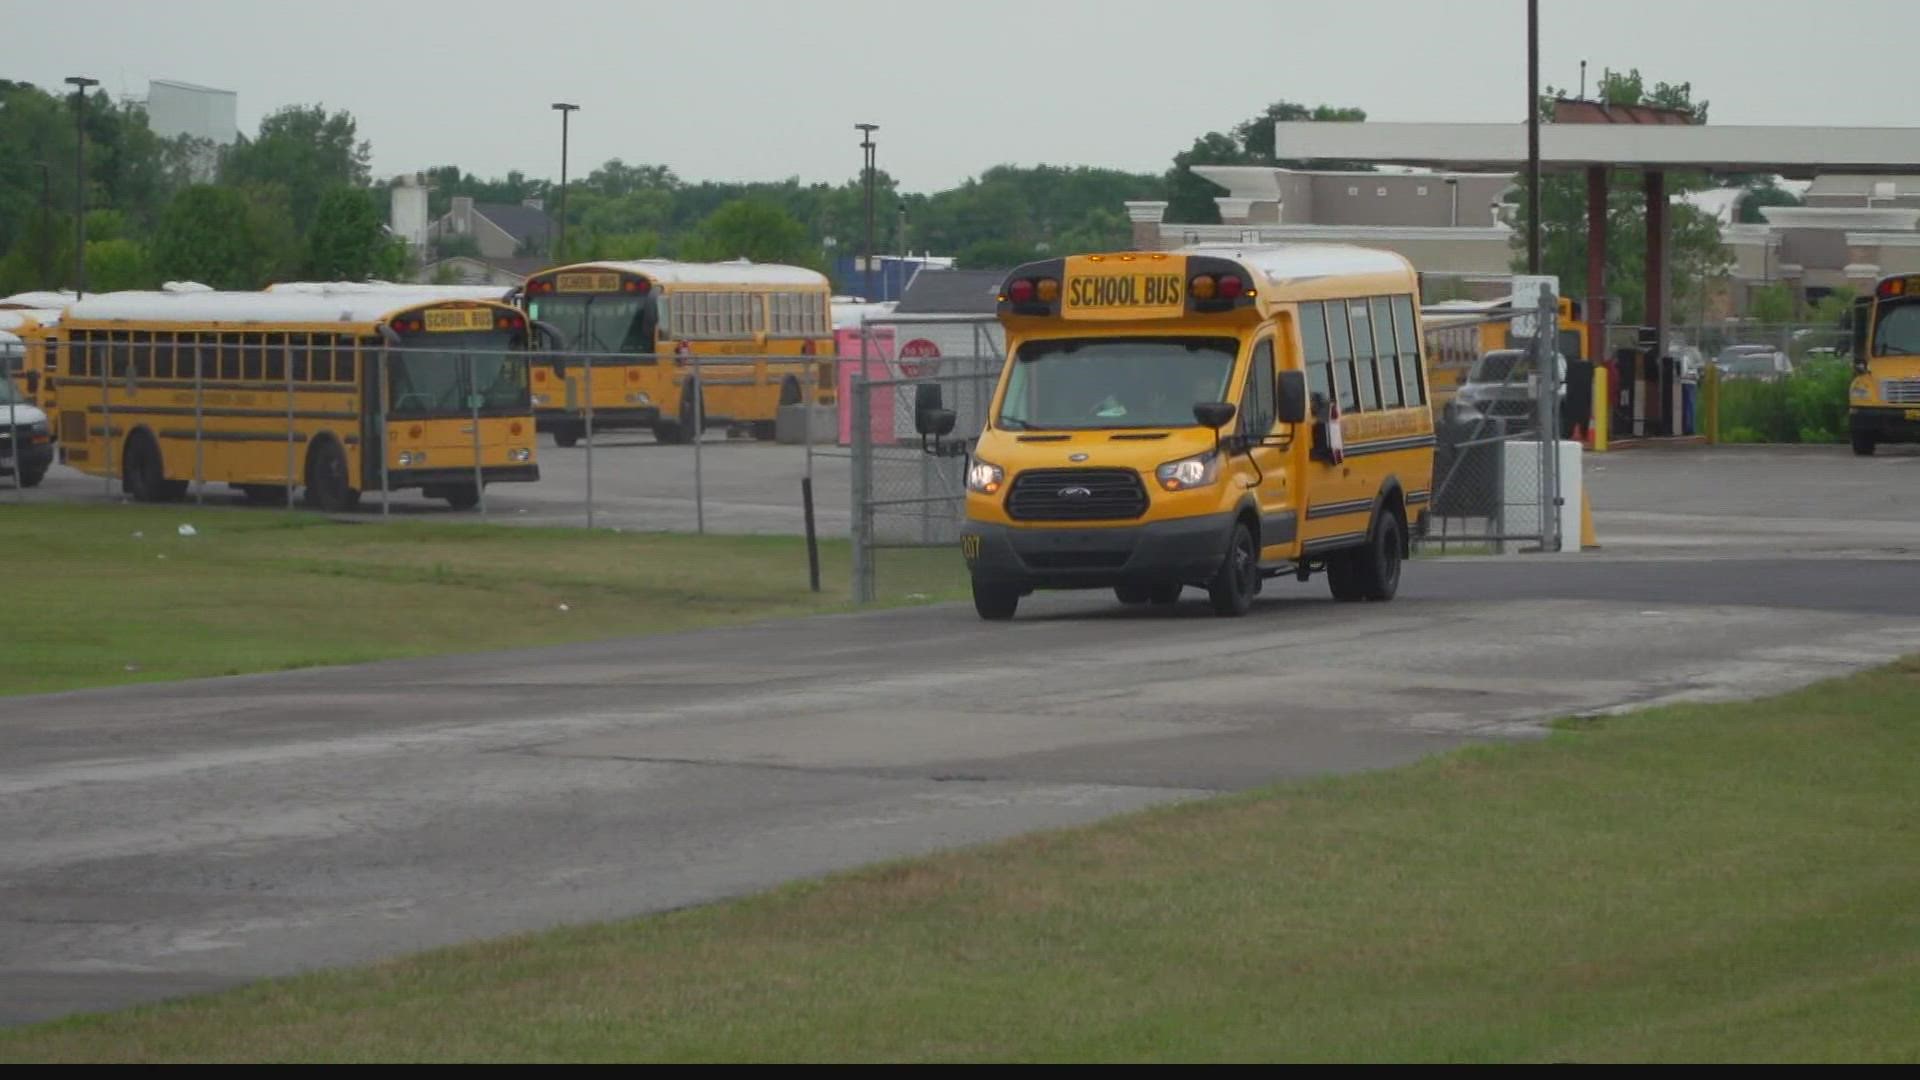 Hamilton Southeastern Schools official are looking for ways to upgrade the affected buses.